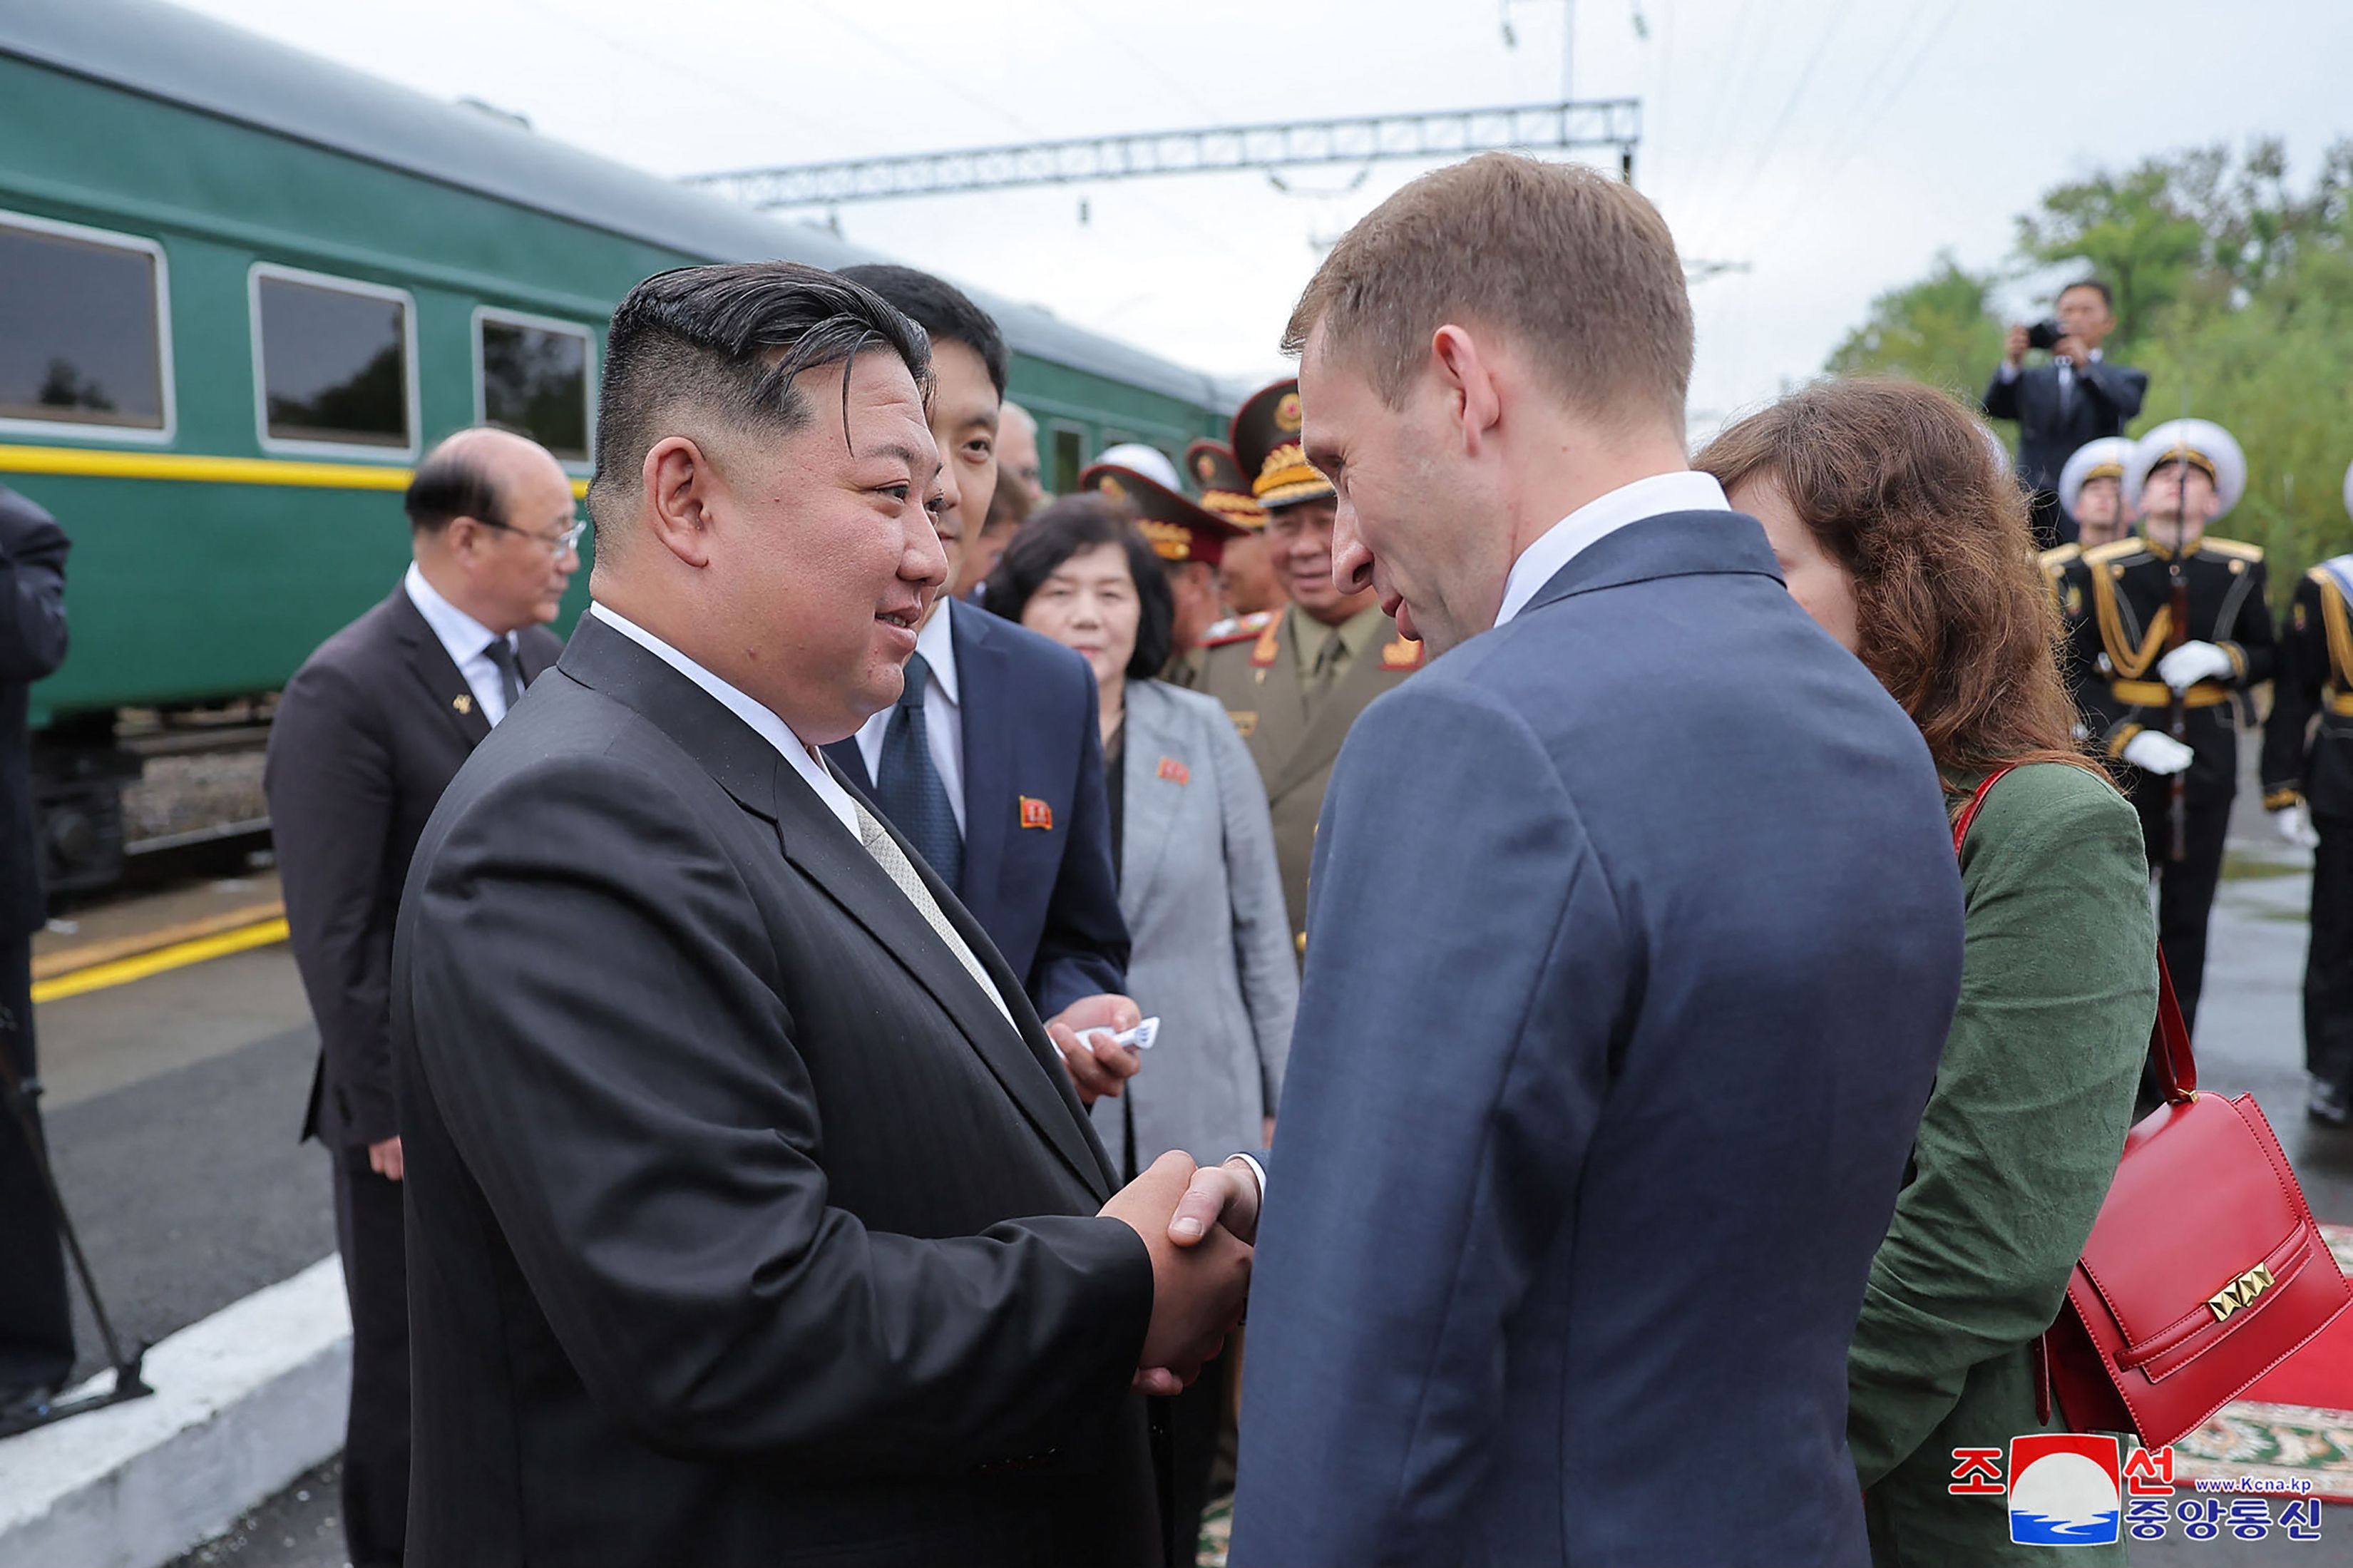 North Korea’s Kim Jong-un shakes hands with Russian natural-resources minister Alexander Kozlov during a farewell ceremony at a railway station near Vladivostok. Photo: KCNA VIA KNS / AFP